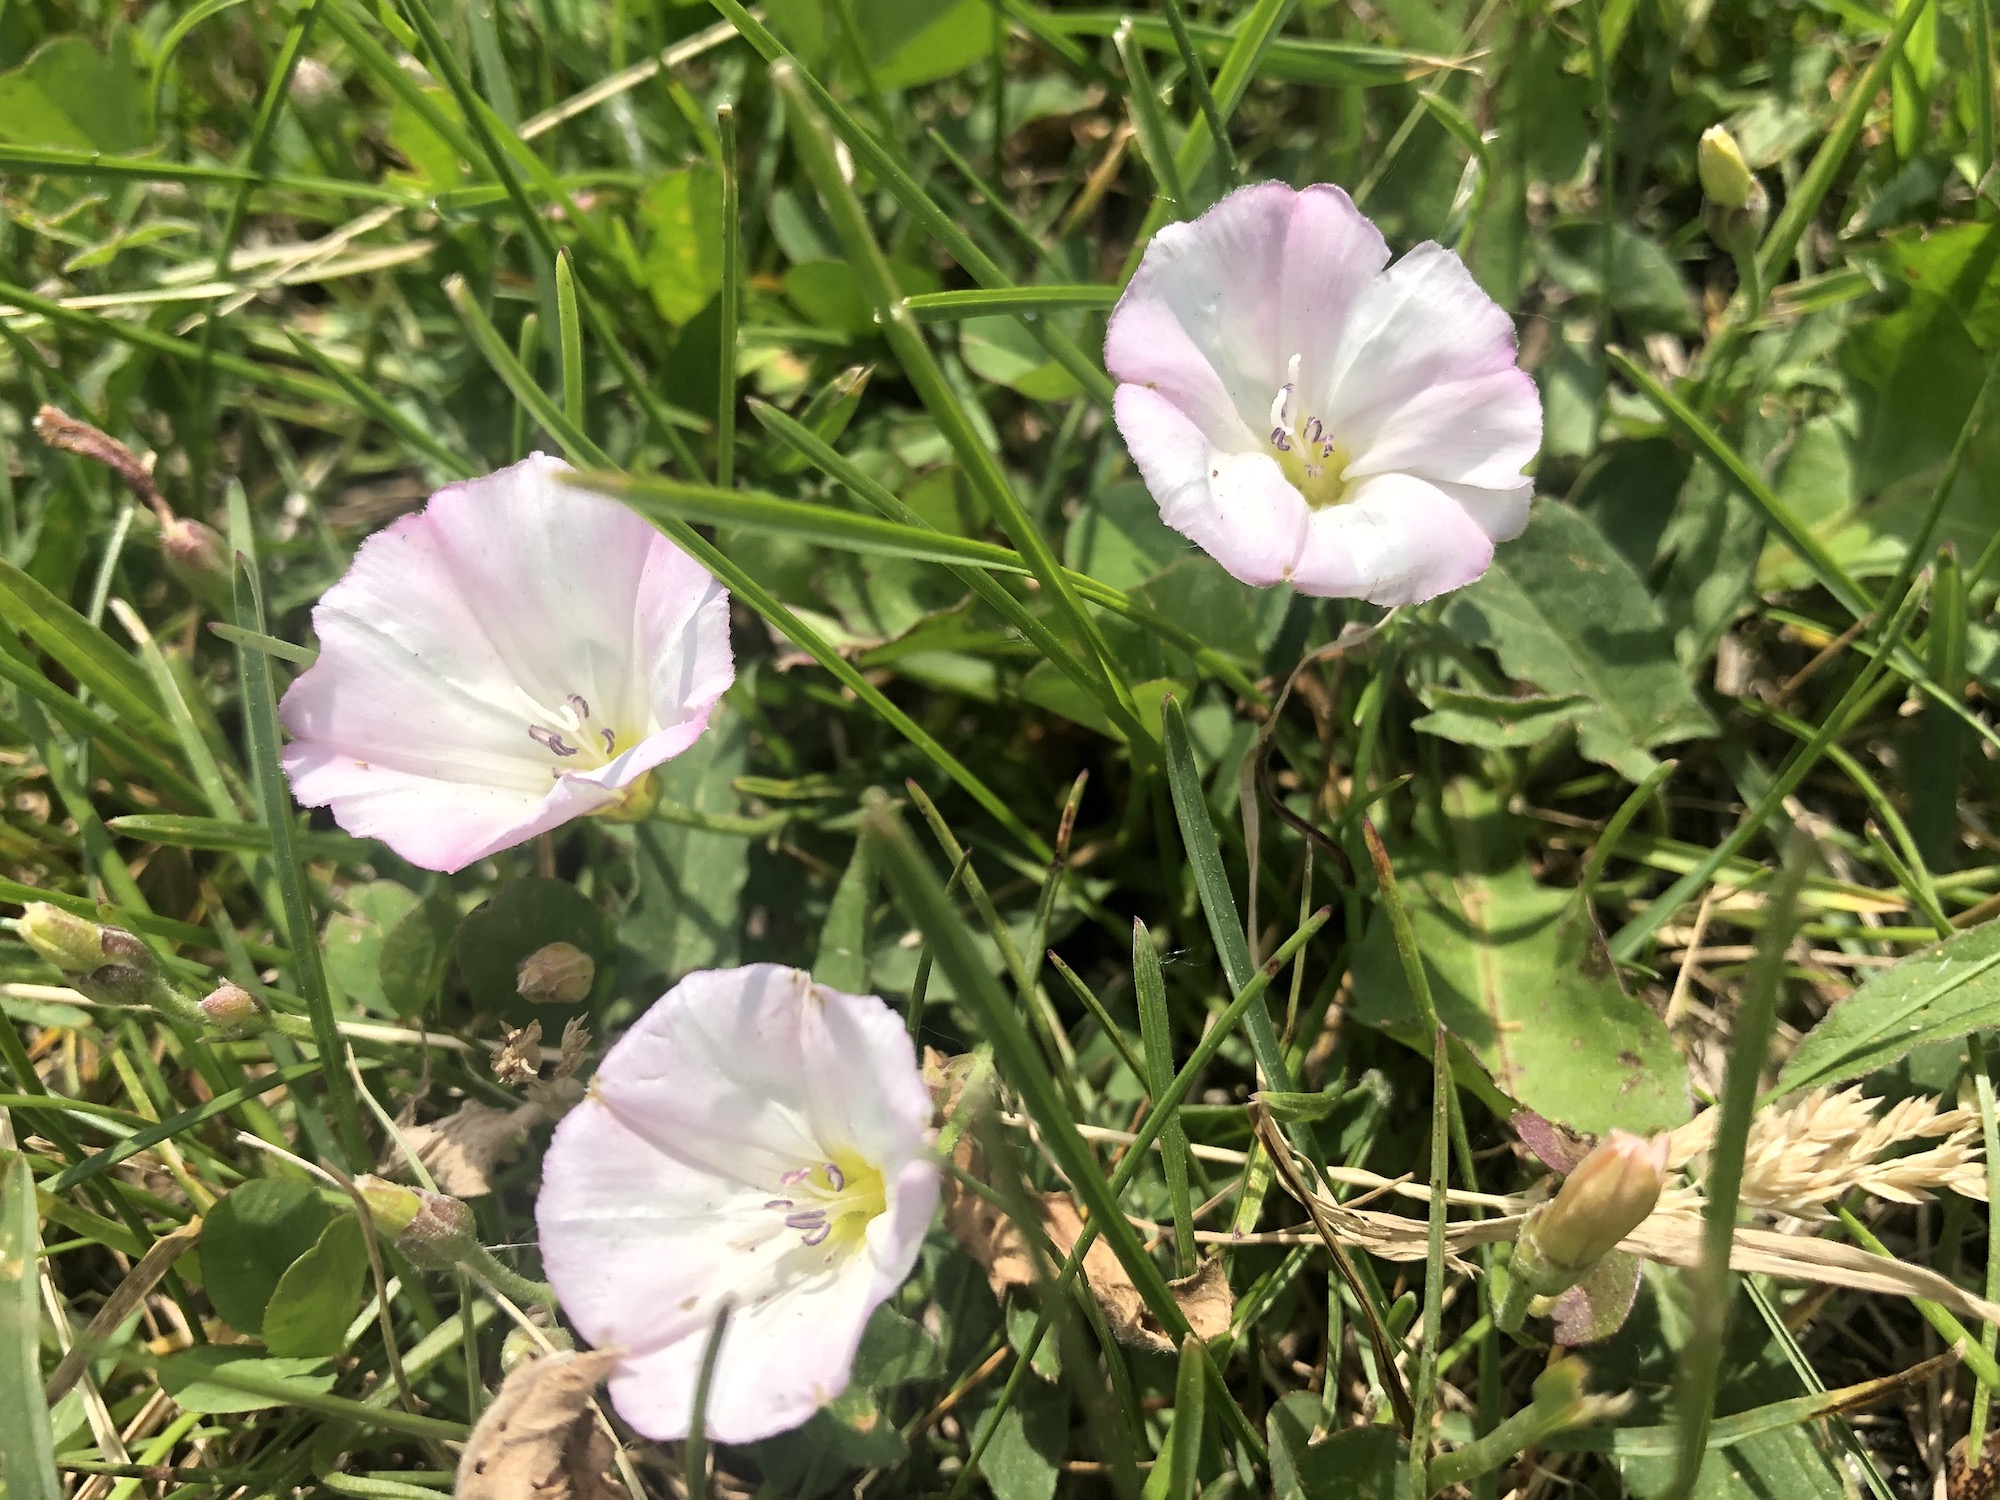 Field Bindweed by UW Arbortetum service road by Visitors Center in Madison, Wisconsin on June 2, 2021.